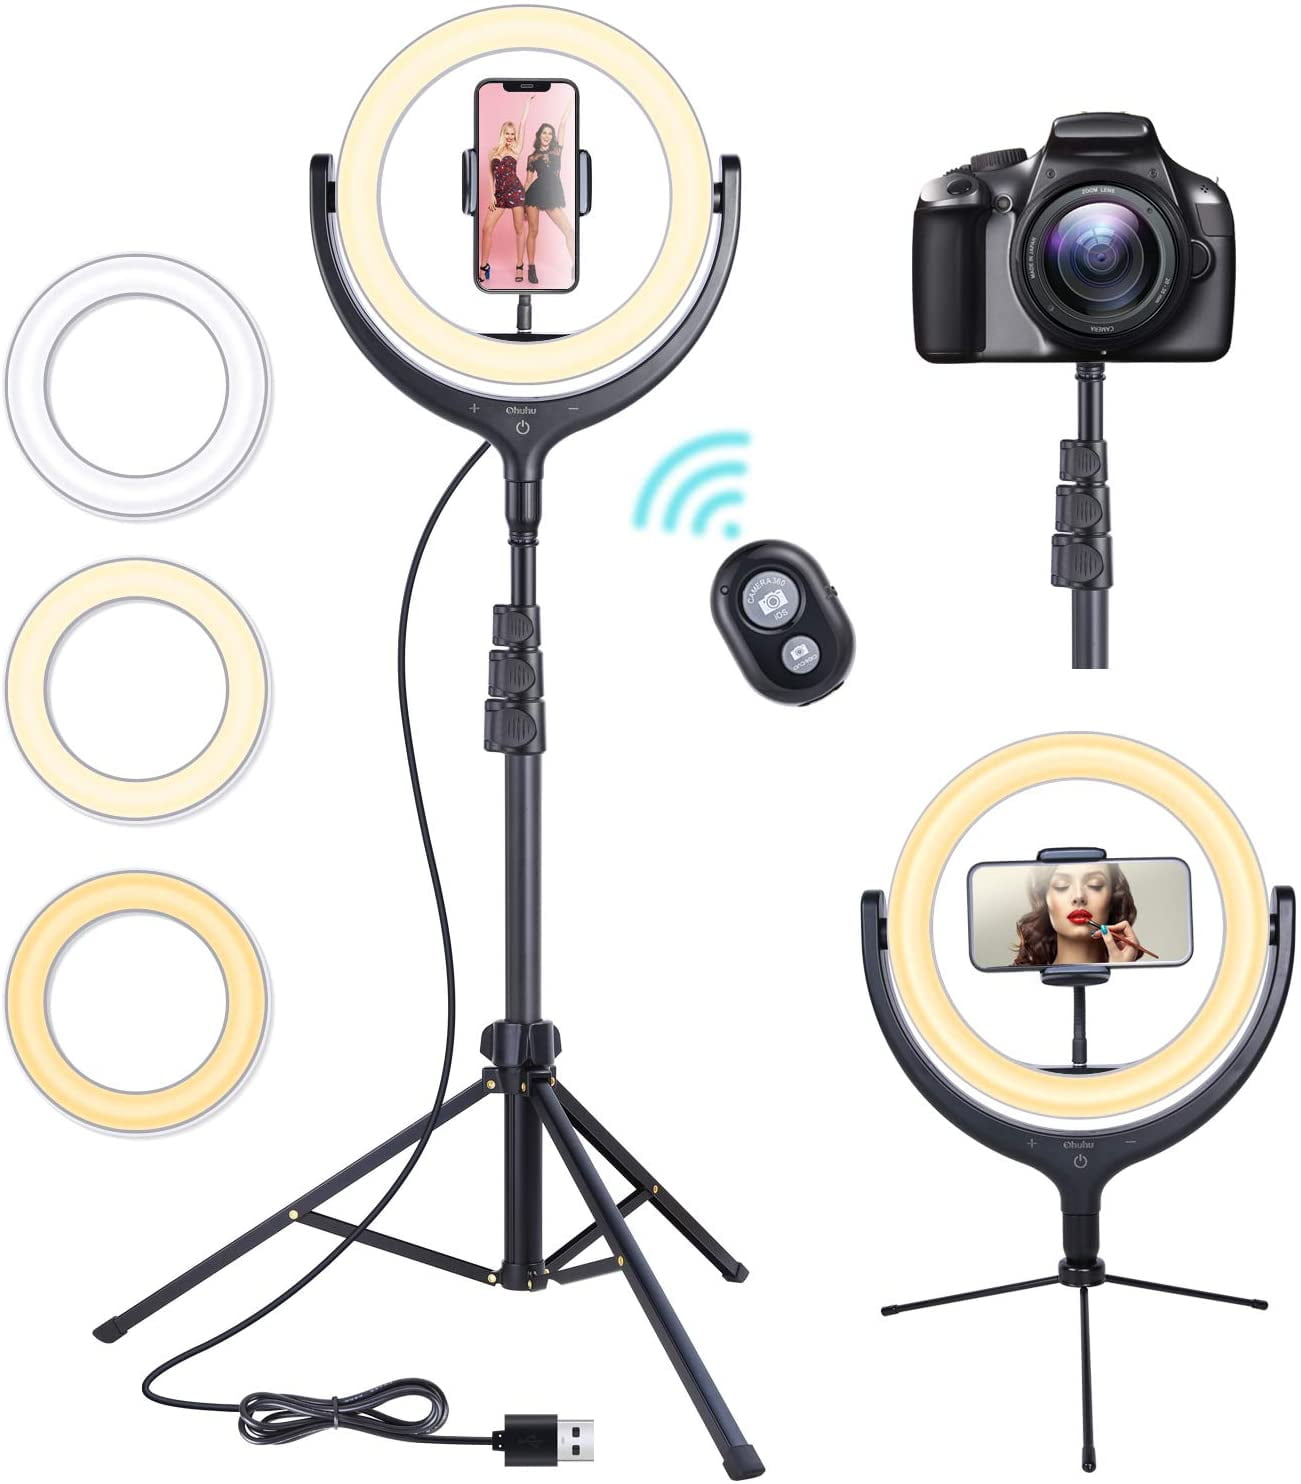 10 Selfie Led Ring Light With 67 Tripod Stand Ohuhu Circle Lights With Cell Phone Holder For Youtube Video Recording Photography Makeup Tutorials Live Streaming Video Conferencing Zoom Meetings Walmart Com